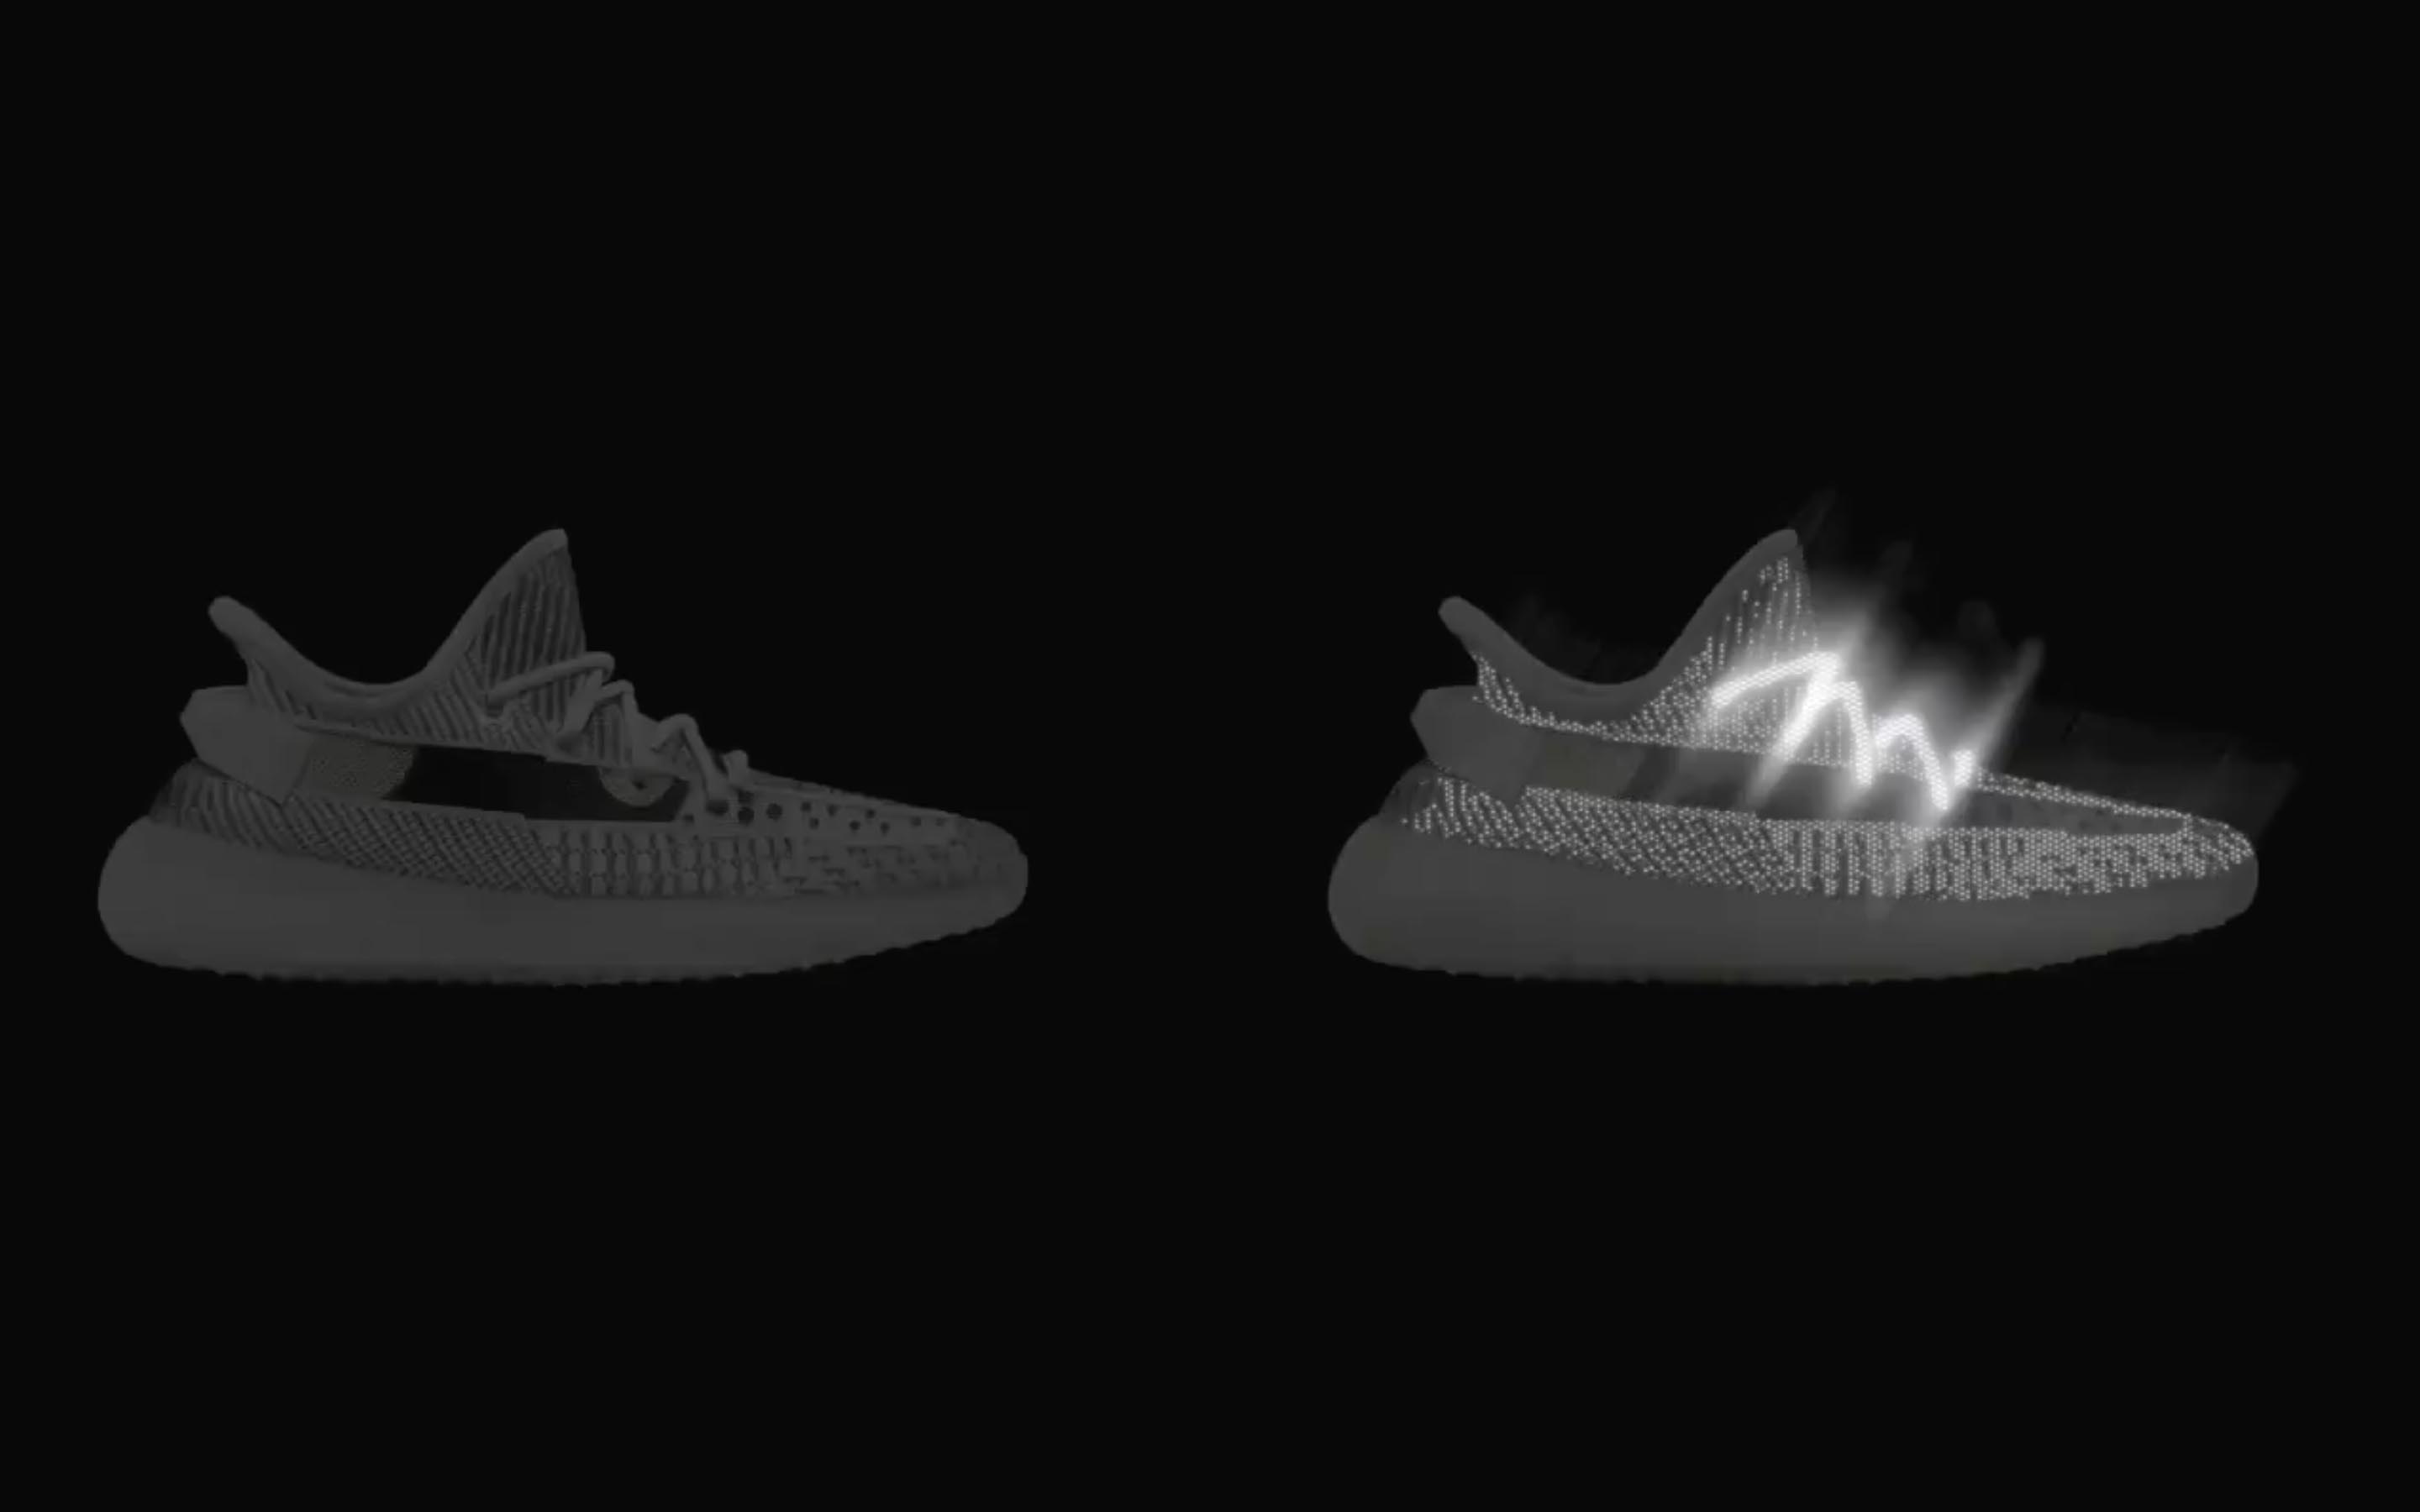 yeezy static reflective adidas cheap online